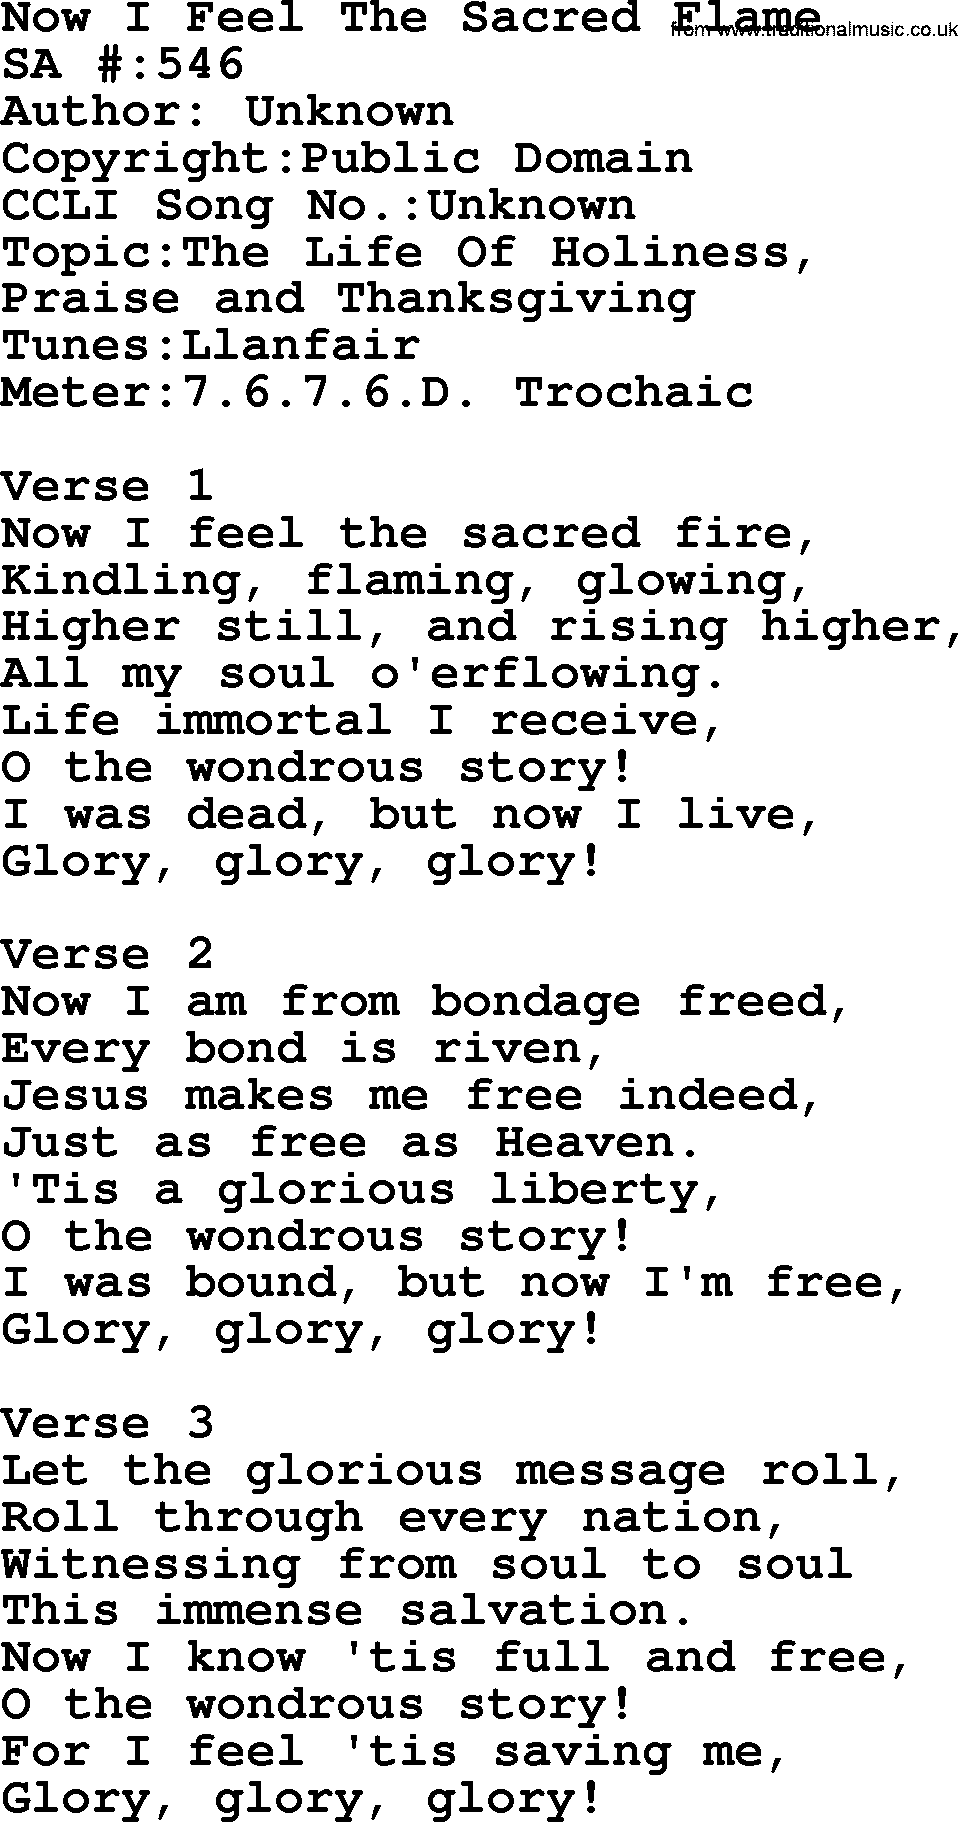 Salvation Army Hymnal Song Now I Feel The Sacred Flame, with Lyrics